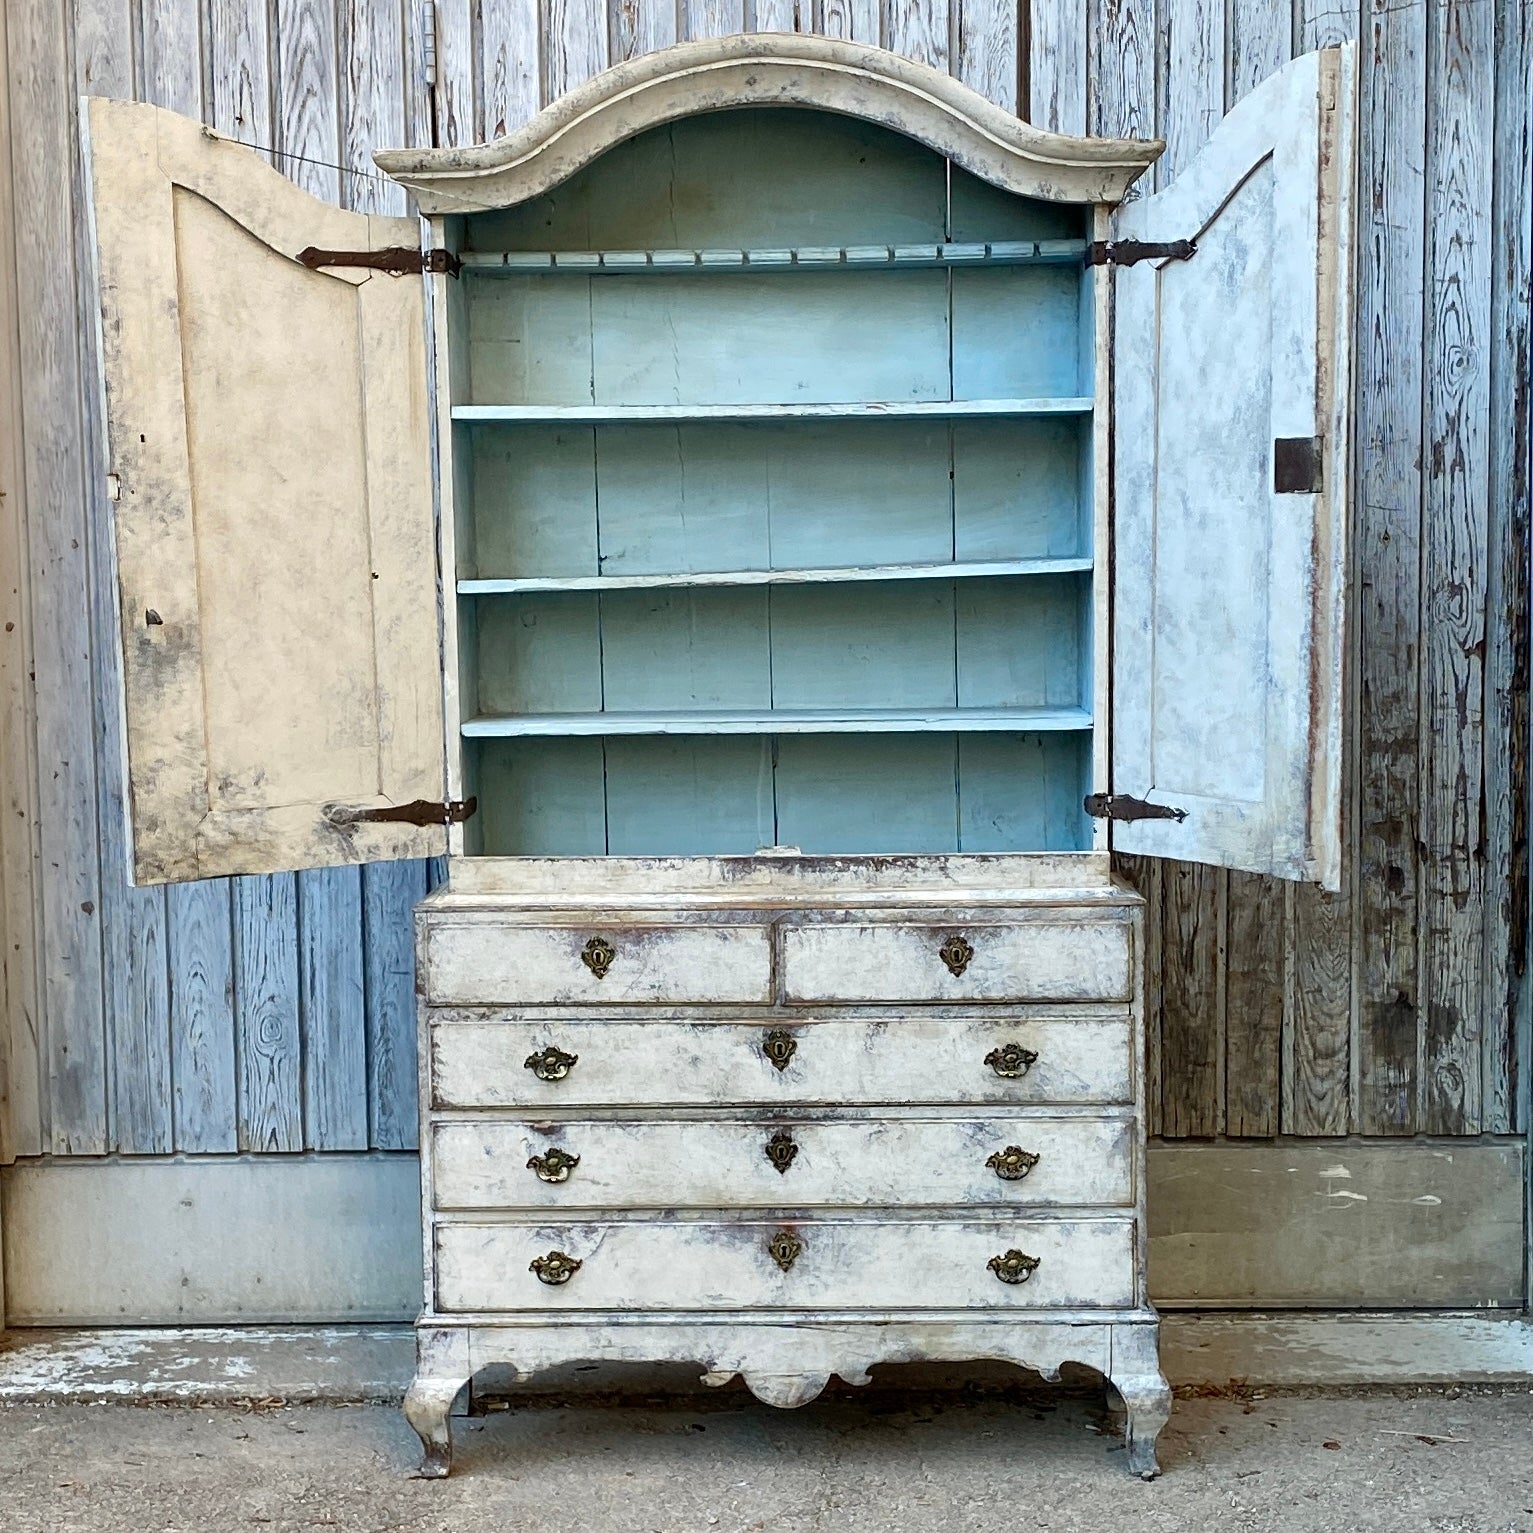 Two Part Gustavian Cabinet With Five Drawers and Two Top Cabinet Doors, Sweden circa 1770.

18th Century Cabinet in two pieces with wonderful arched cornice and original hardware. Upper unit features three shelves and one spoon rack in blue